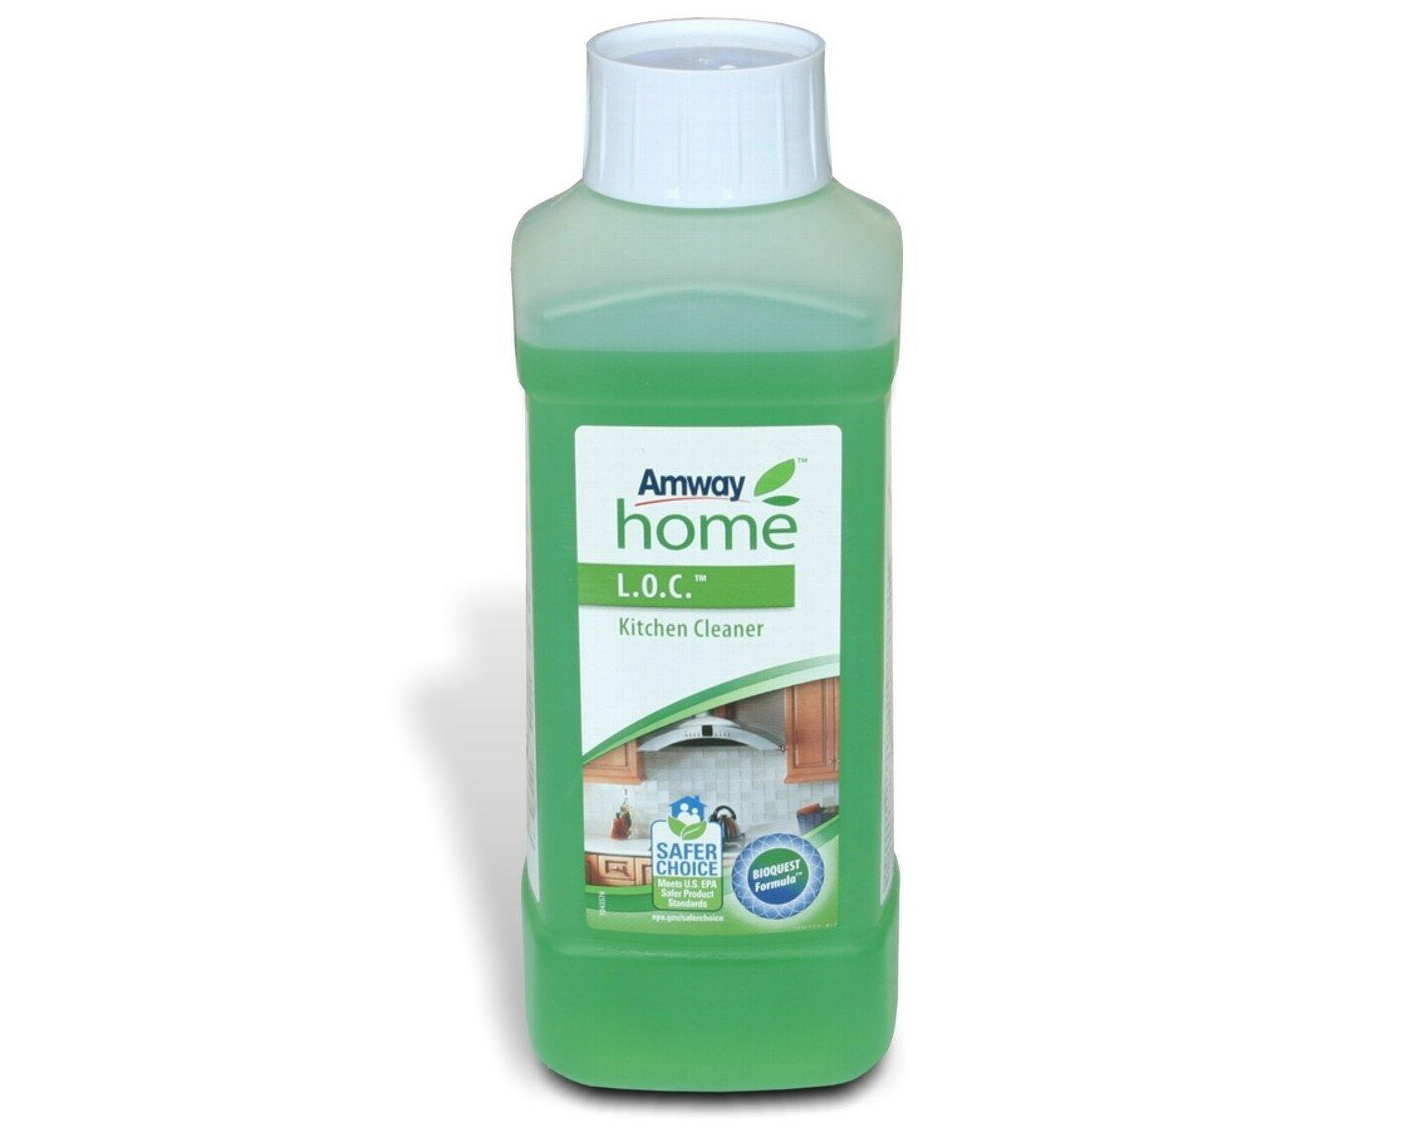 L.O.C. Kitchen Cleaner Amway